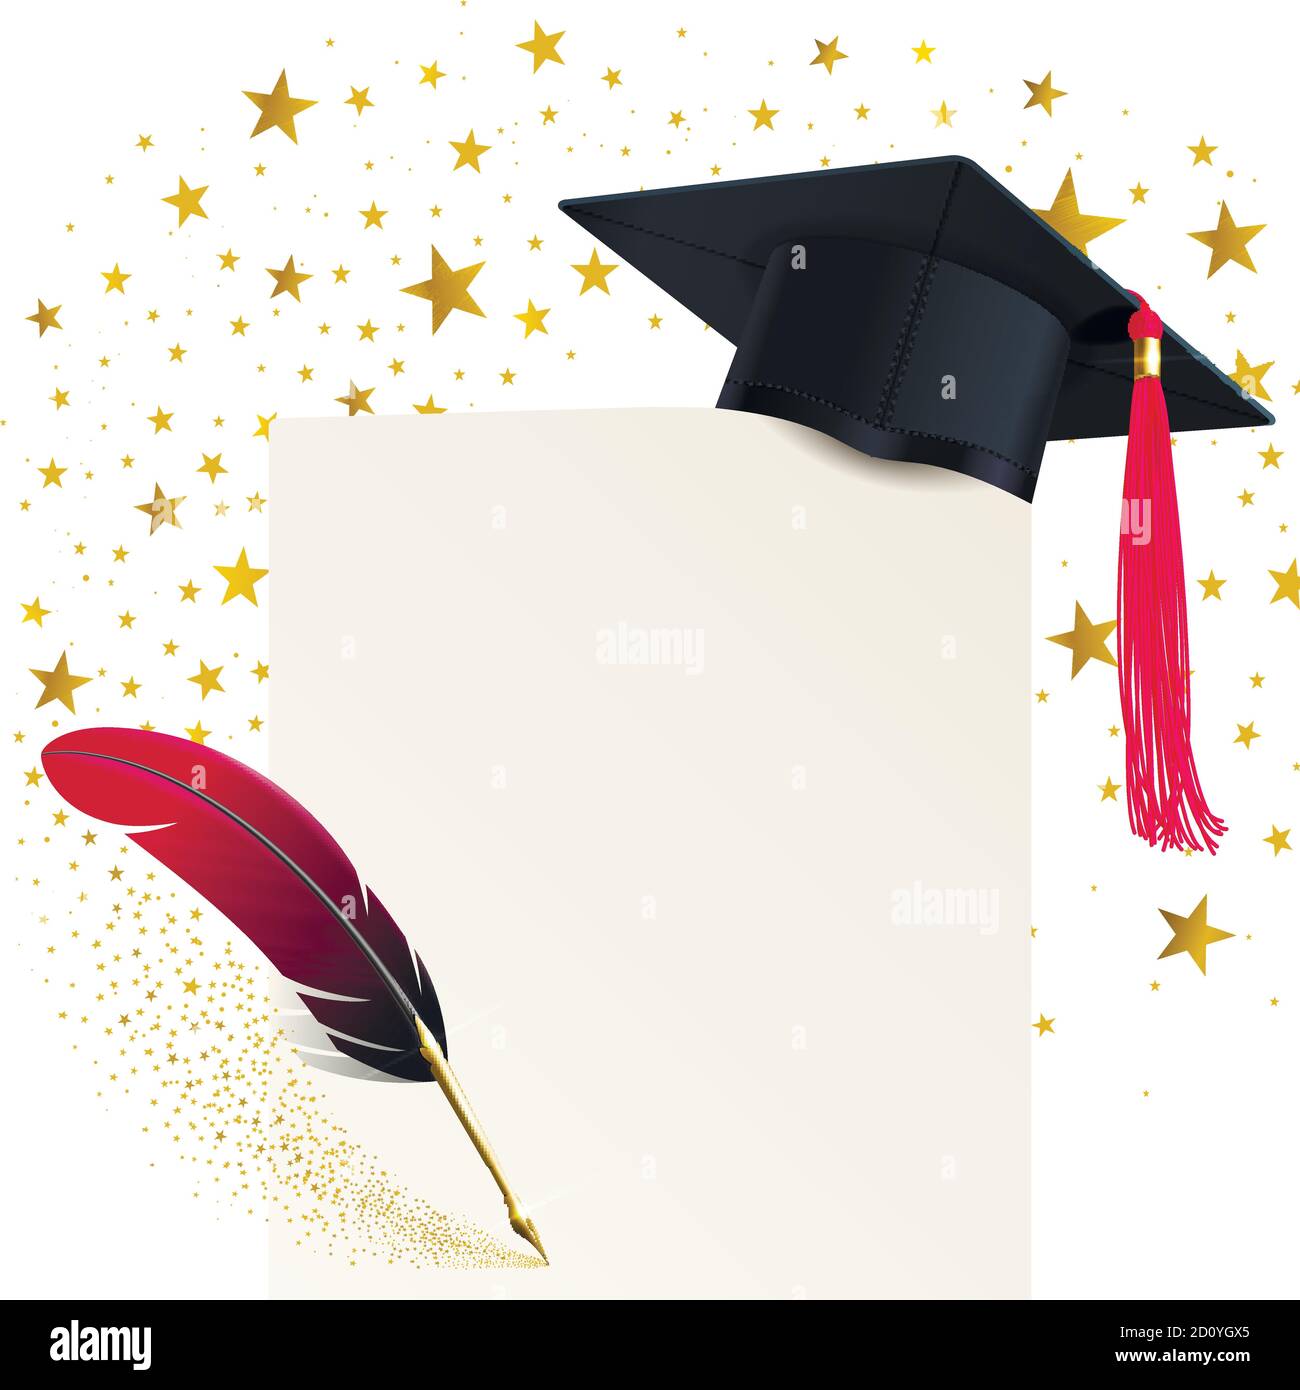 student hat with a red tassel and a diploma on a background of a swirl of gold stars Stock Vector